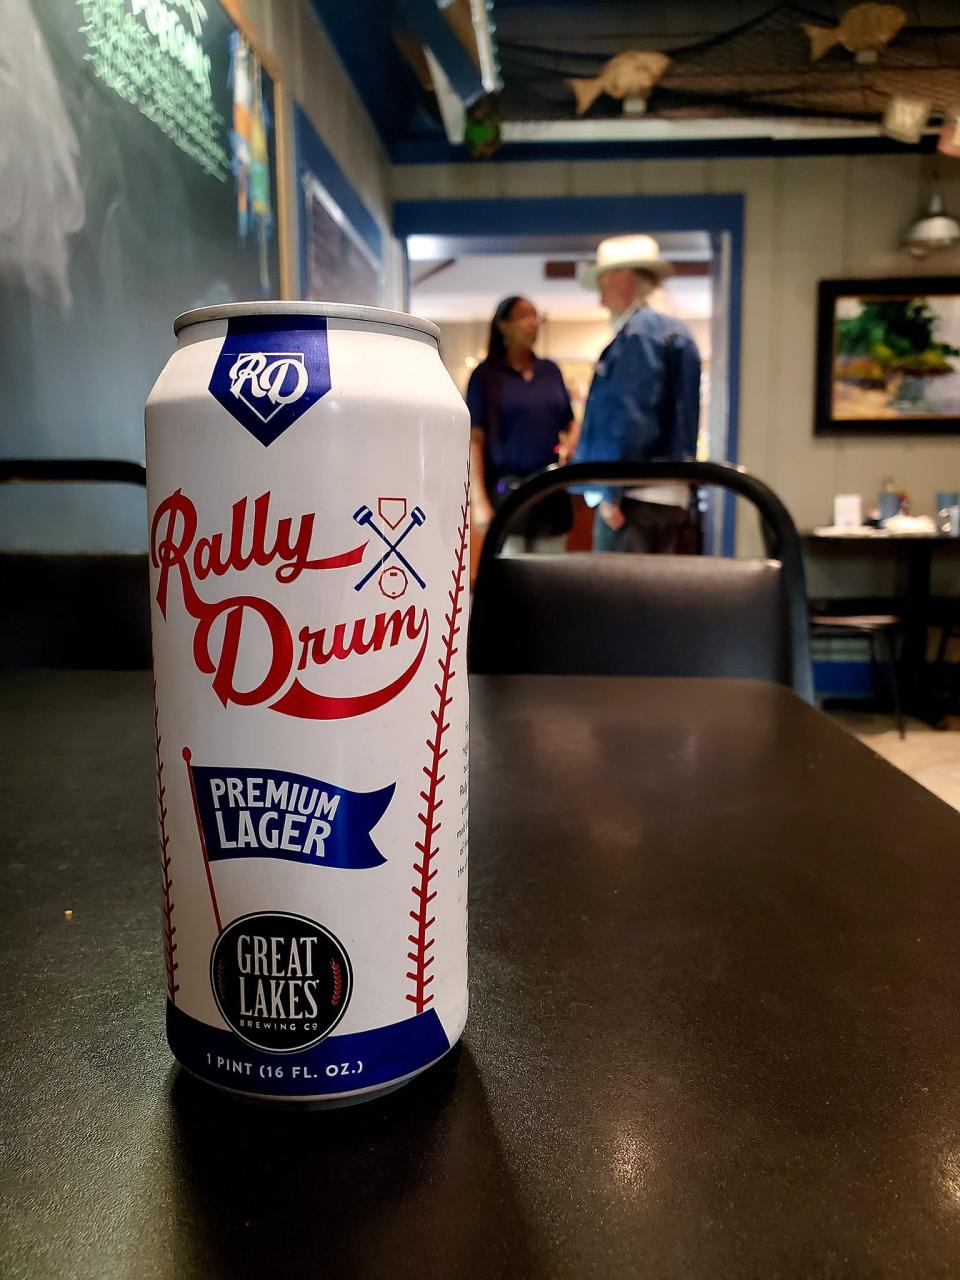 The Great Lakes Brewing Company Rally Drum Lager called out to me, even though it was still morning. It went well with the Lake Erie perch dinner I ordered at the Marblehead Galley.